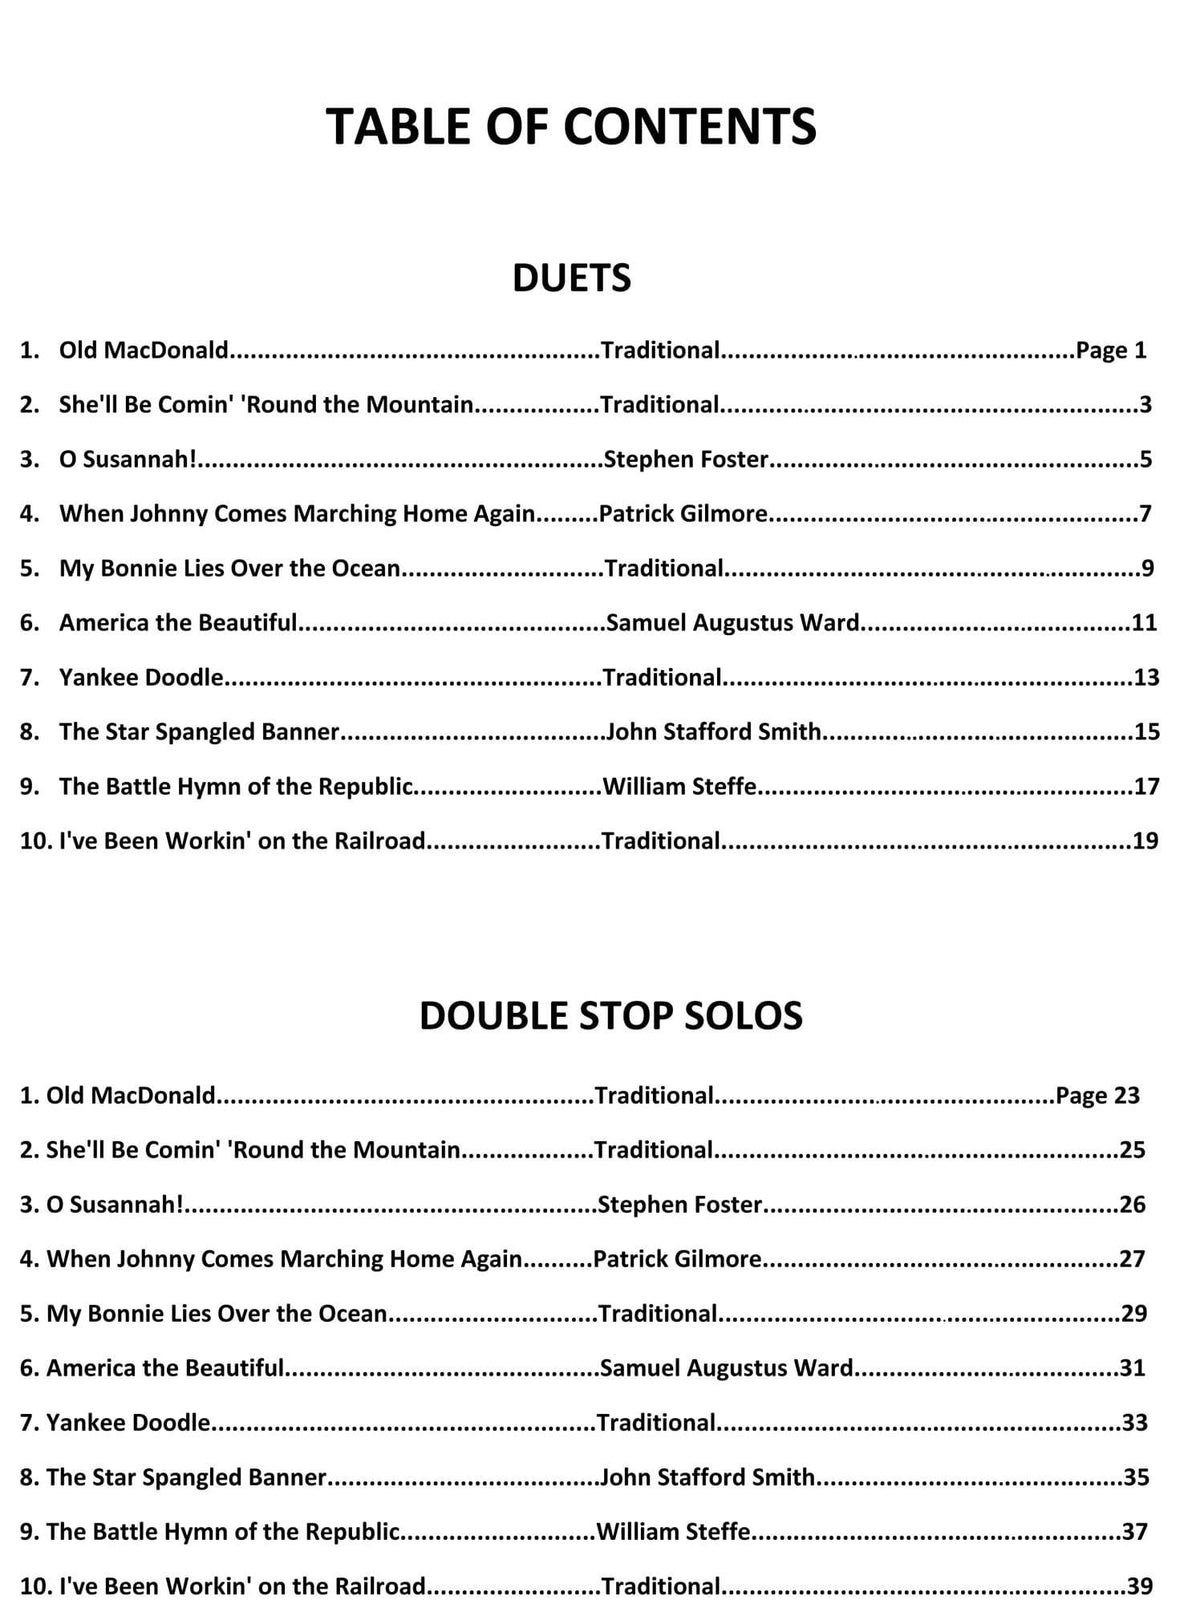 Yasuda, Martha - American Melodies: Double Stop Solos and Duets For Violin, Volume II - Digital Download